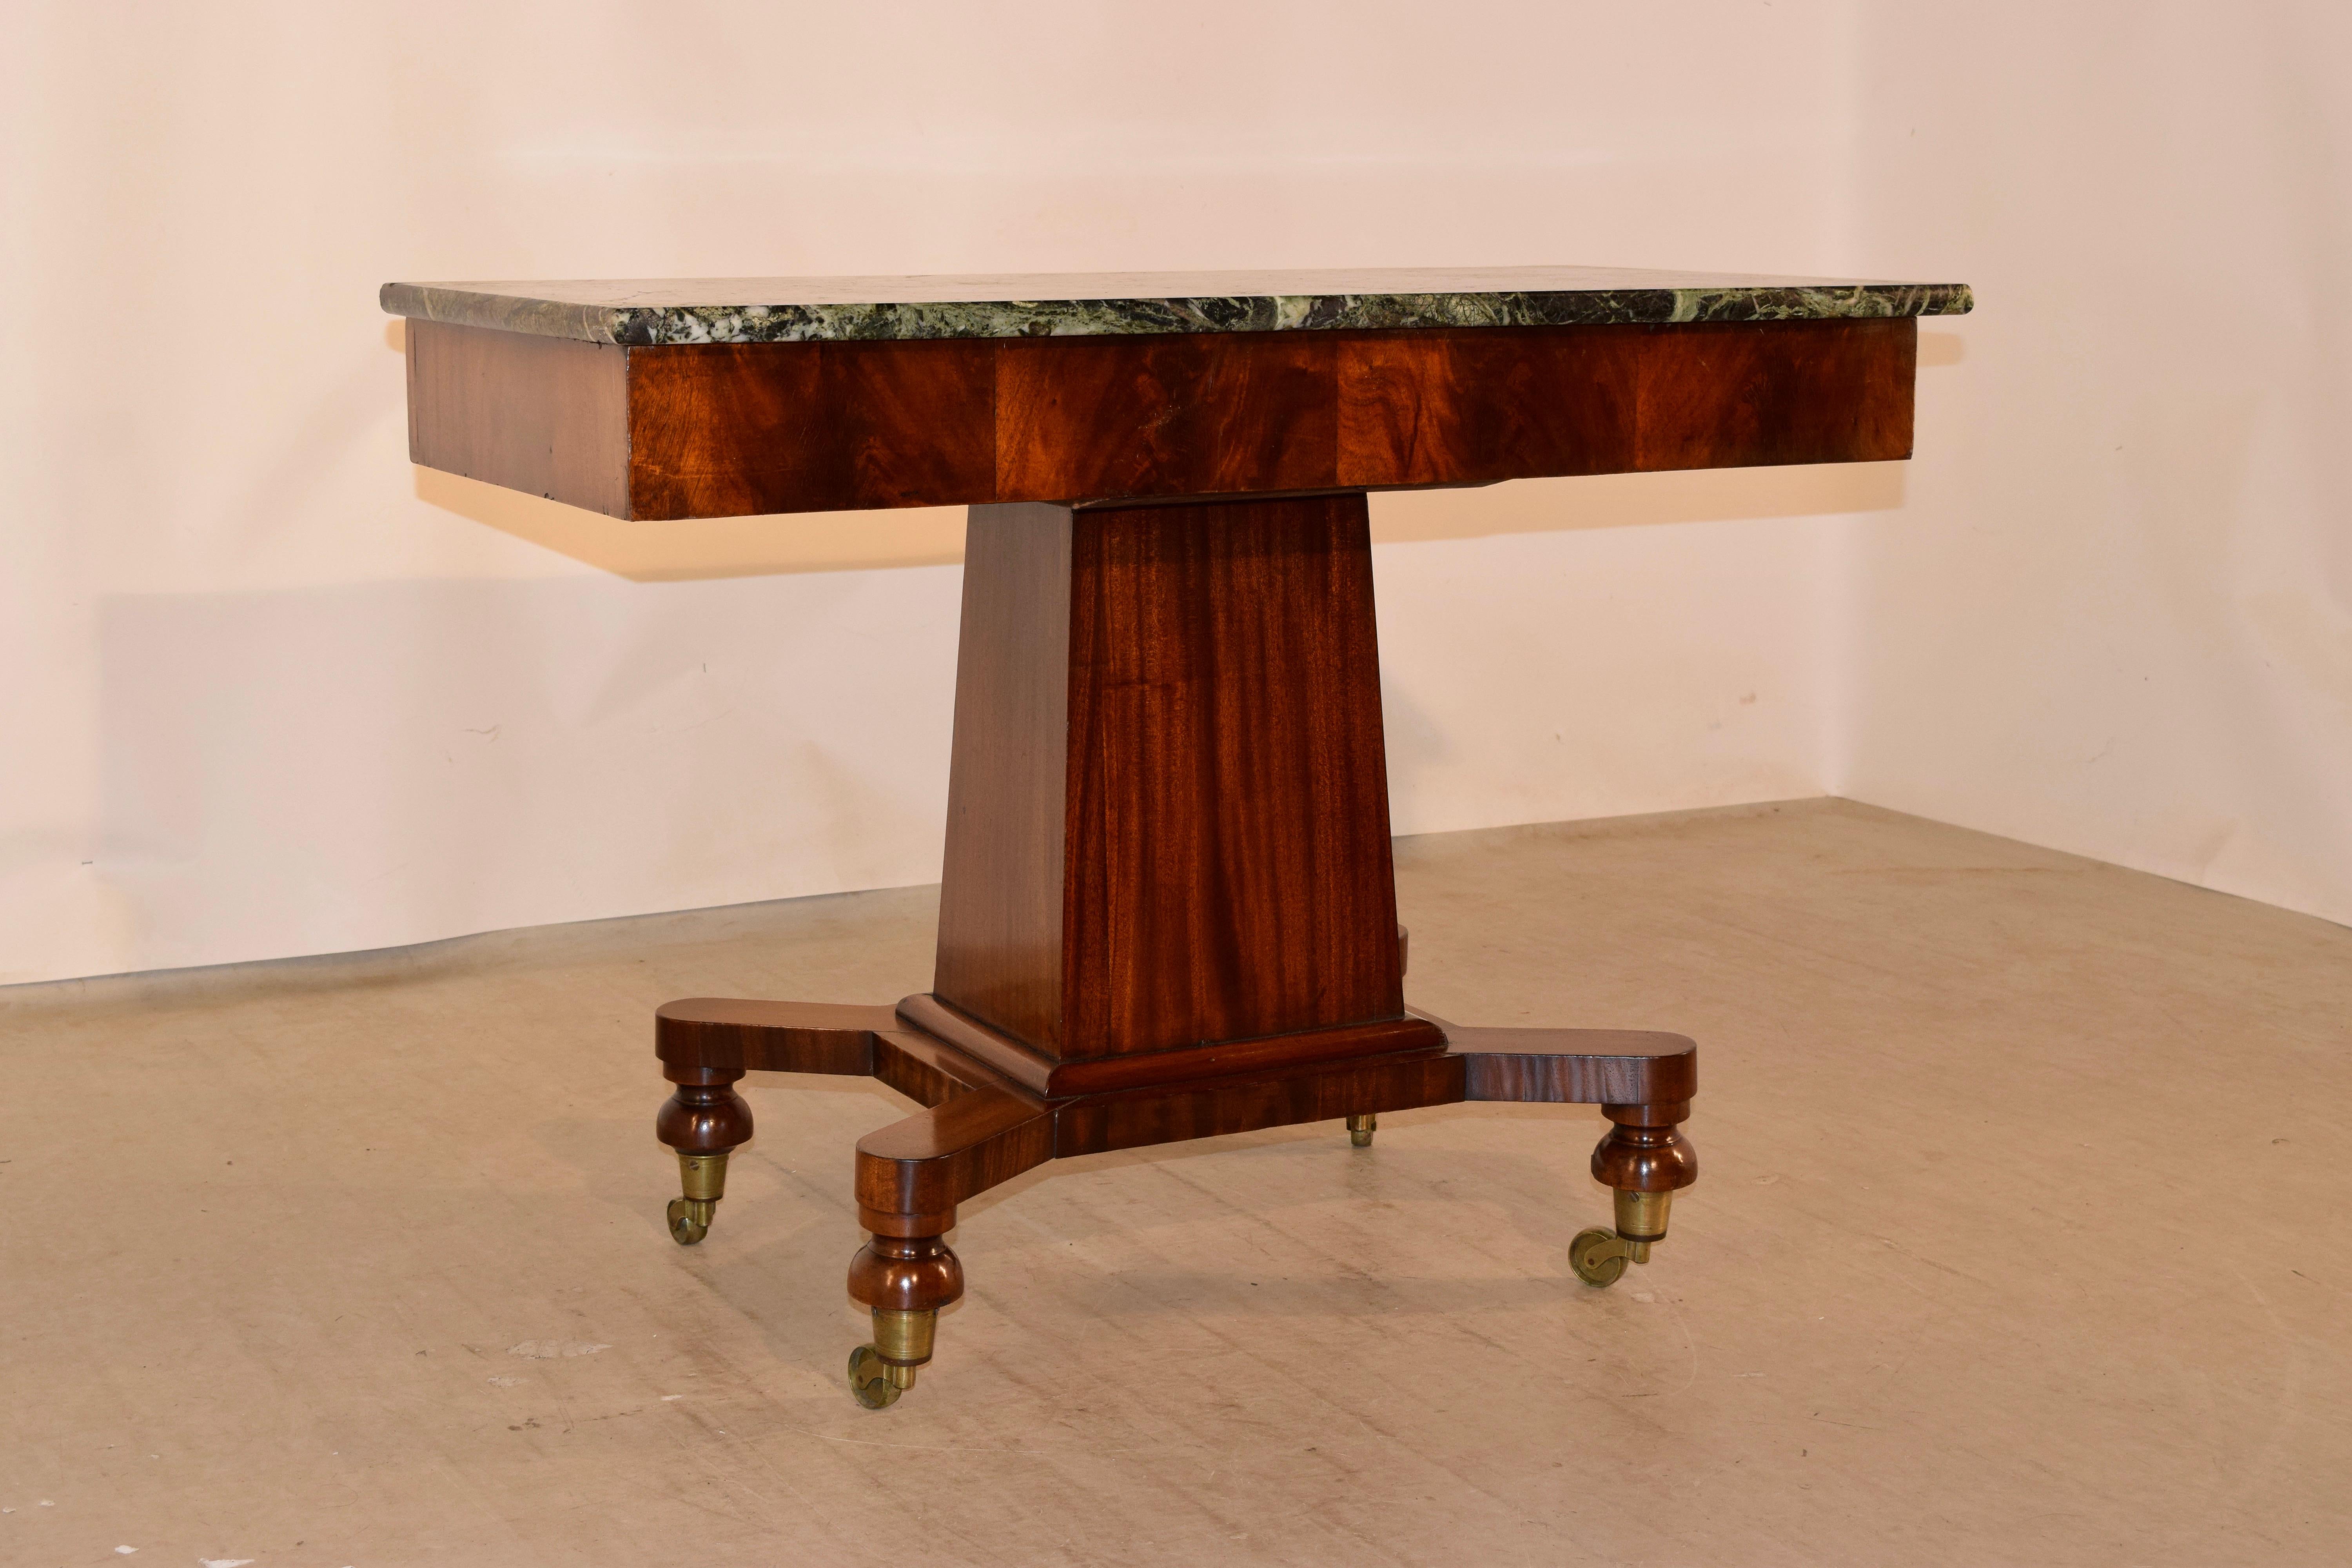 19th century French Empire console table with a marble top supported on a tapered pedestal base made from mahogany with gorgeous graining. The central pedestal is supported on four legs which retain their original casters. The table is simple and